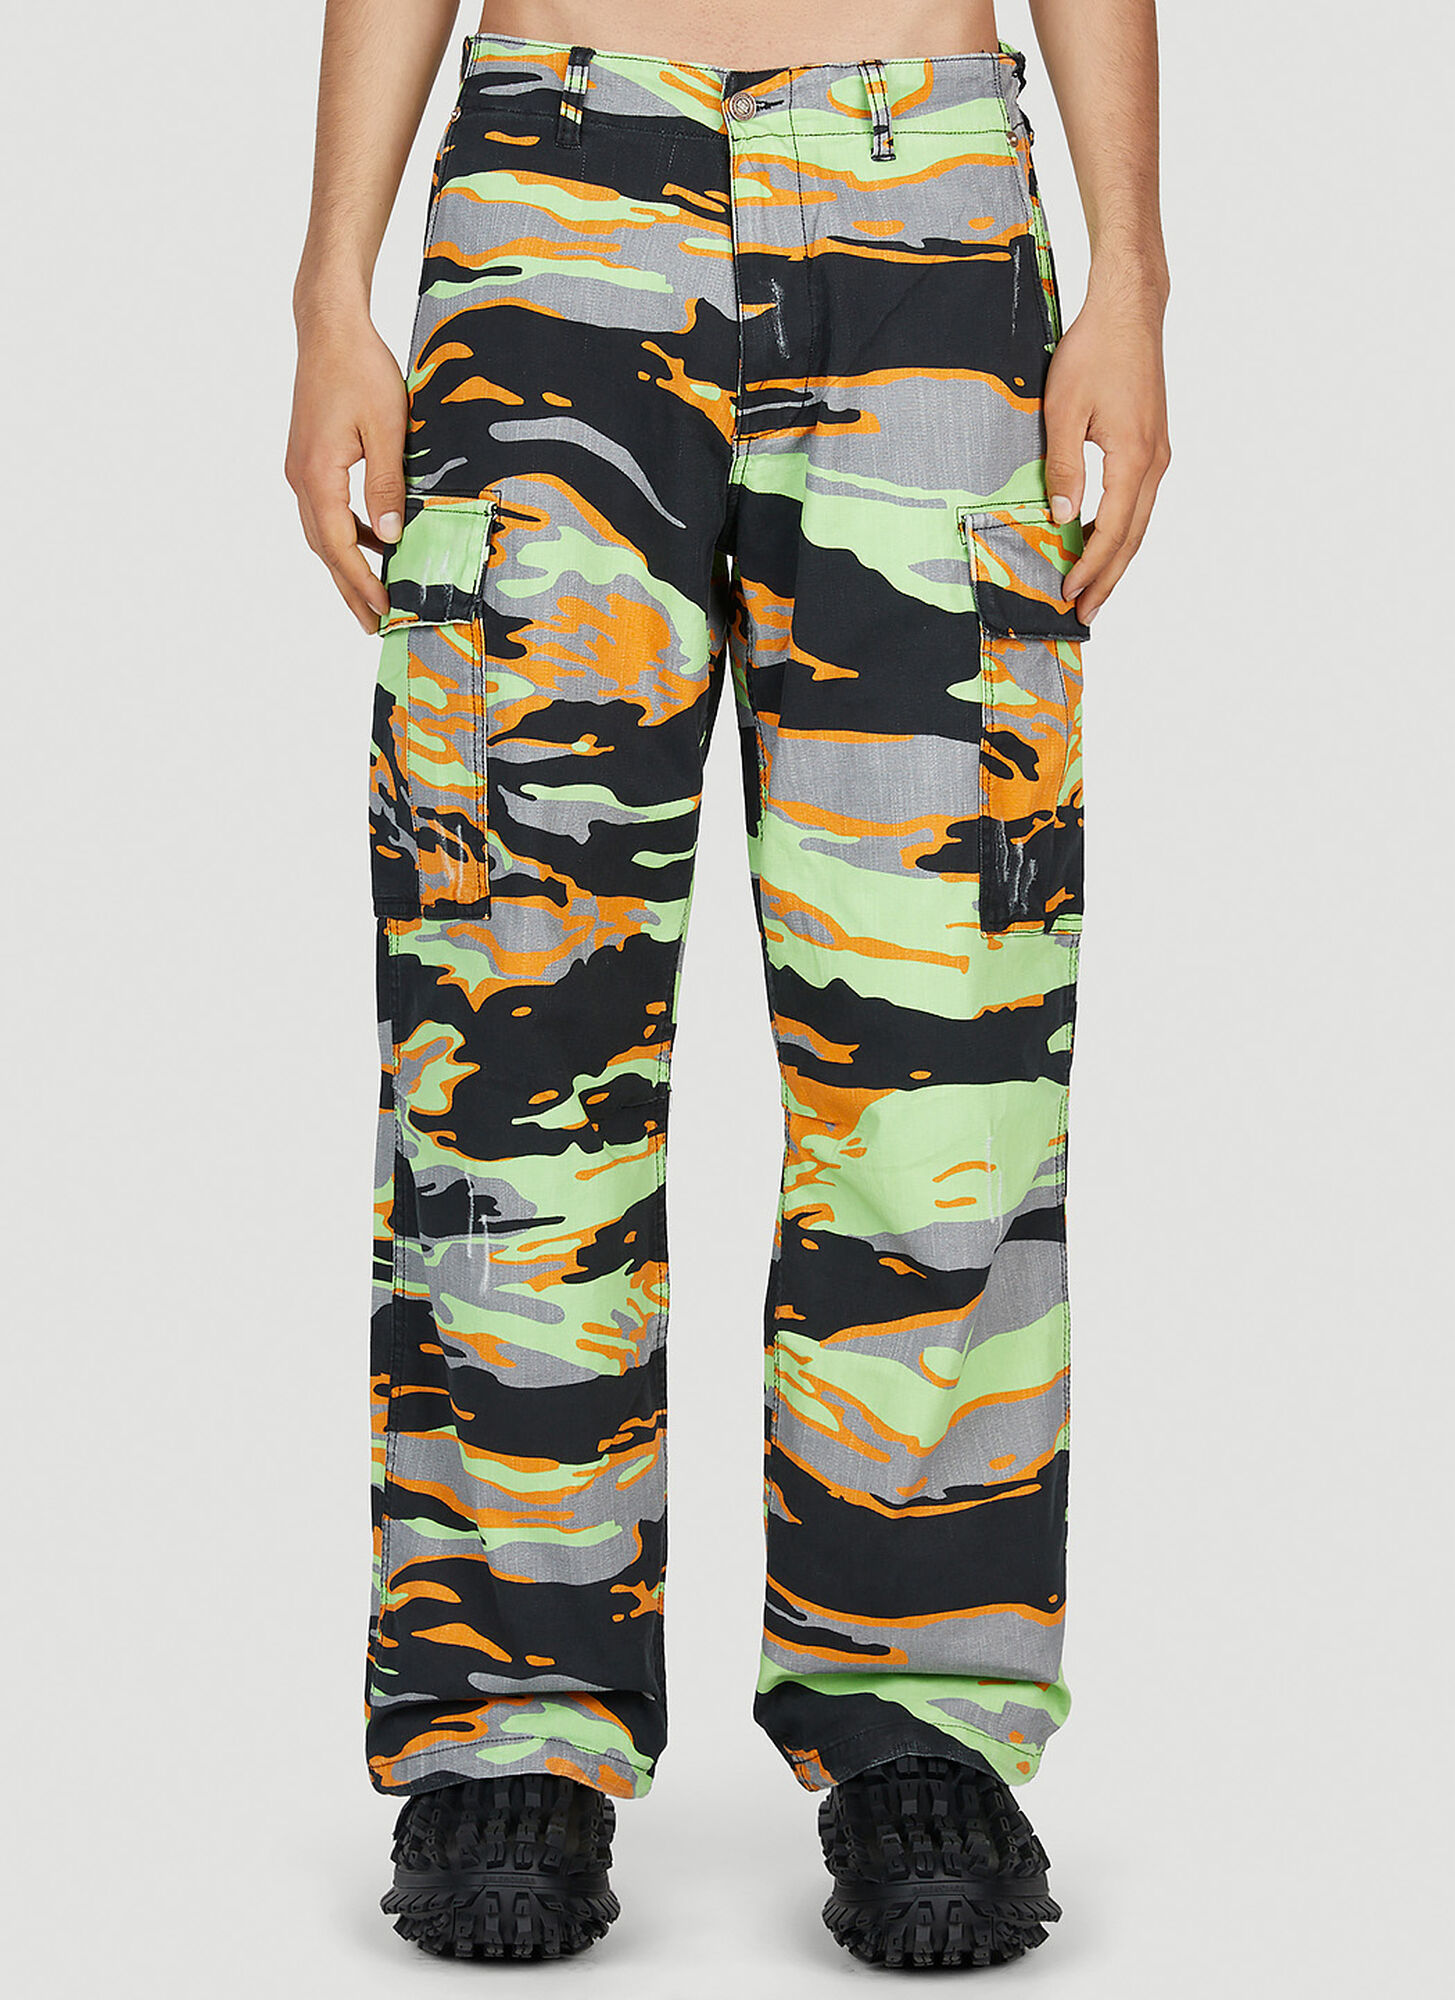 Erl Camouflage Pants Male Green